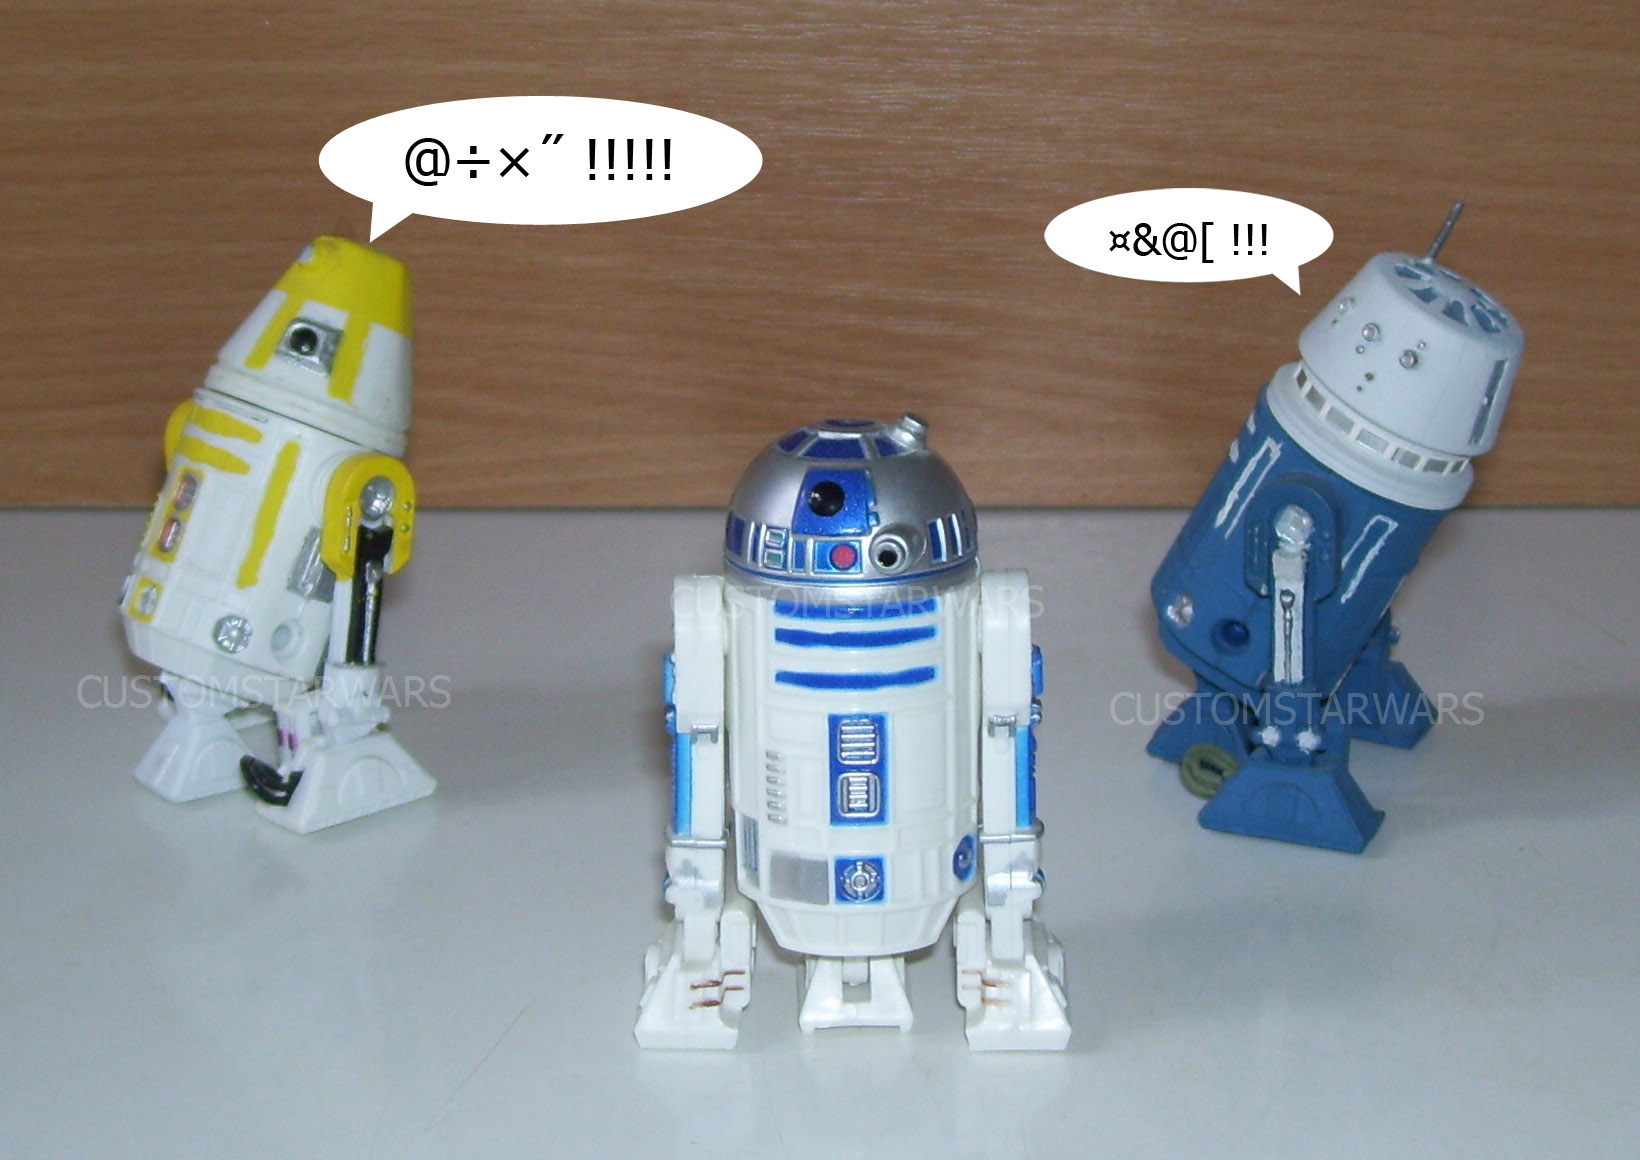 R2 in hurry pushed 2 astromech droids away